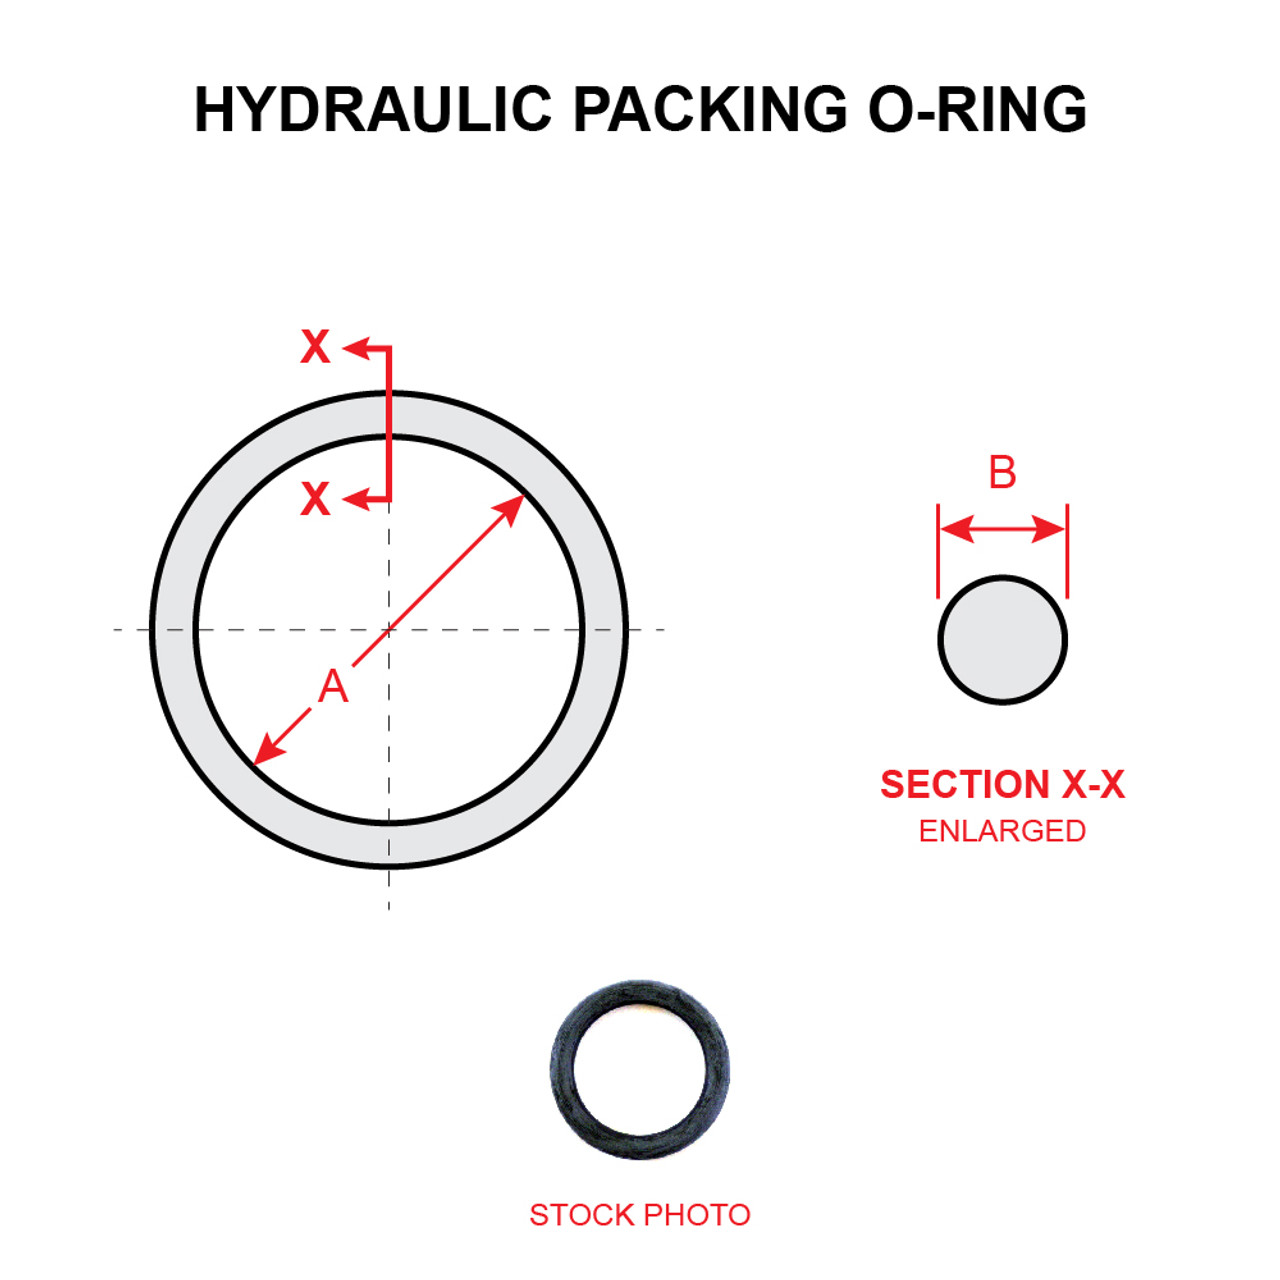 MS28775-114   HYDRAULIC PACKING O-RING